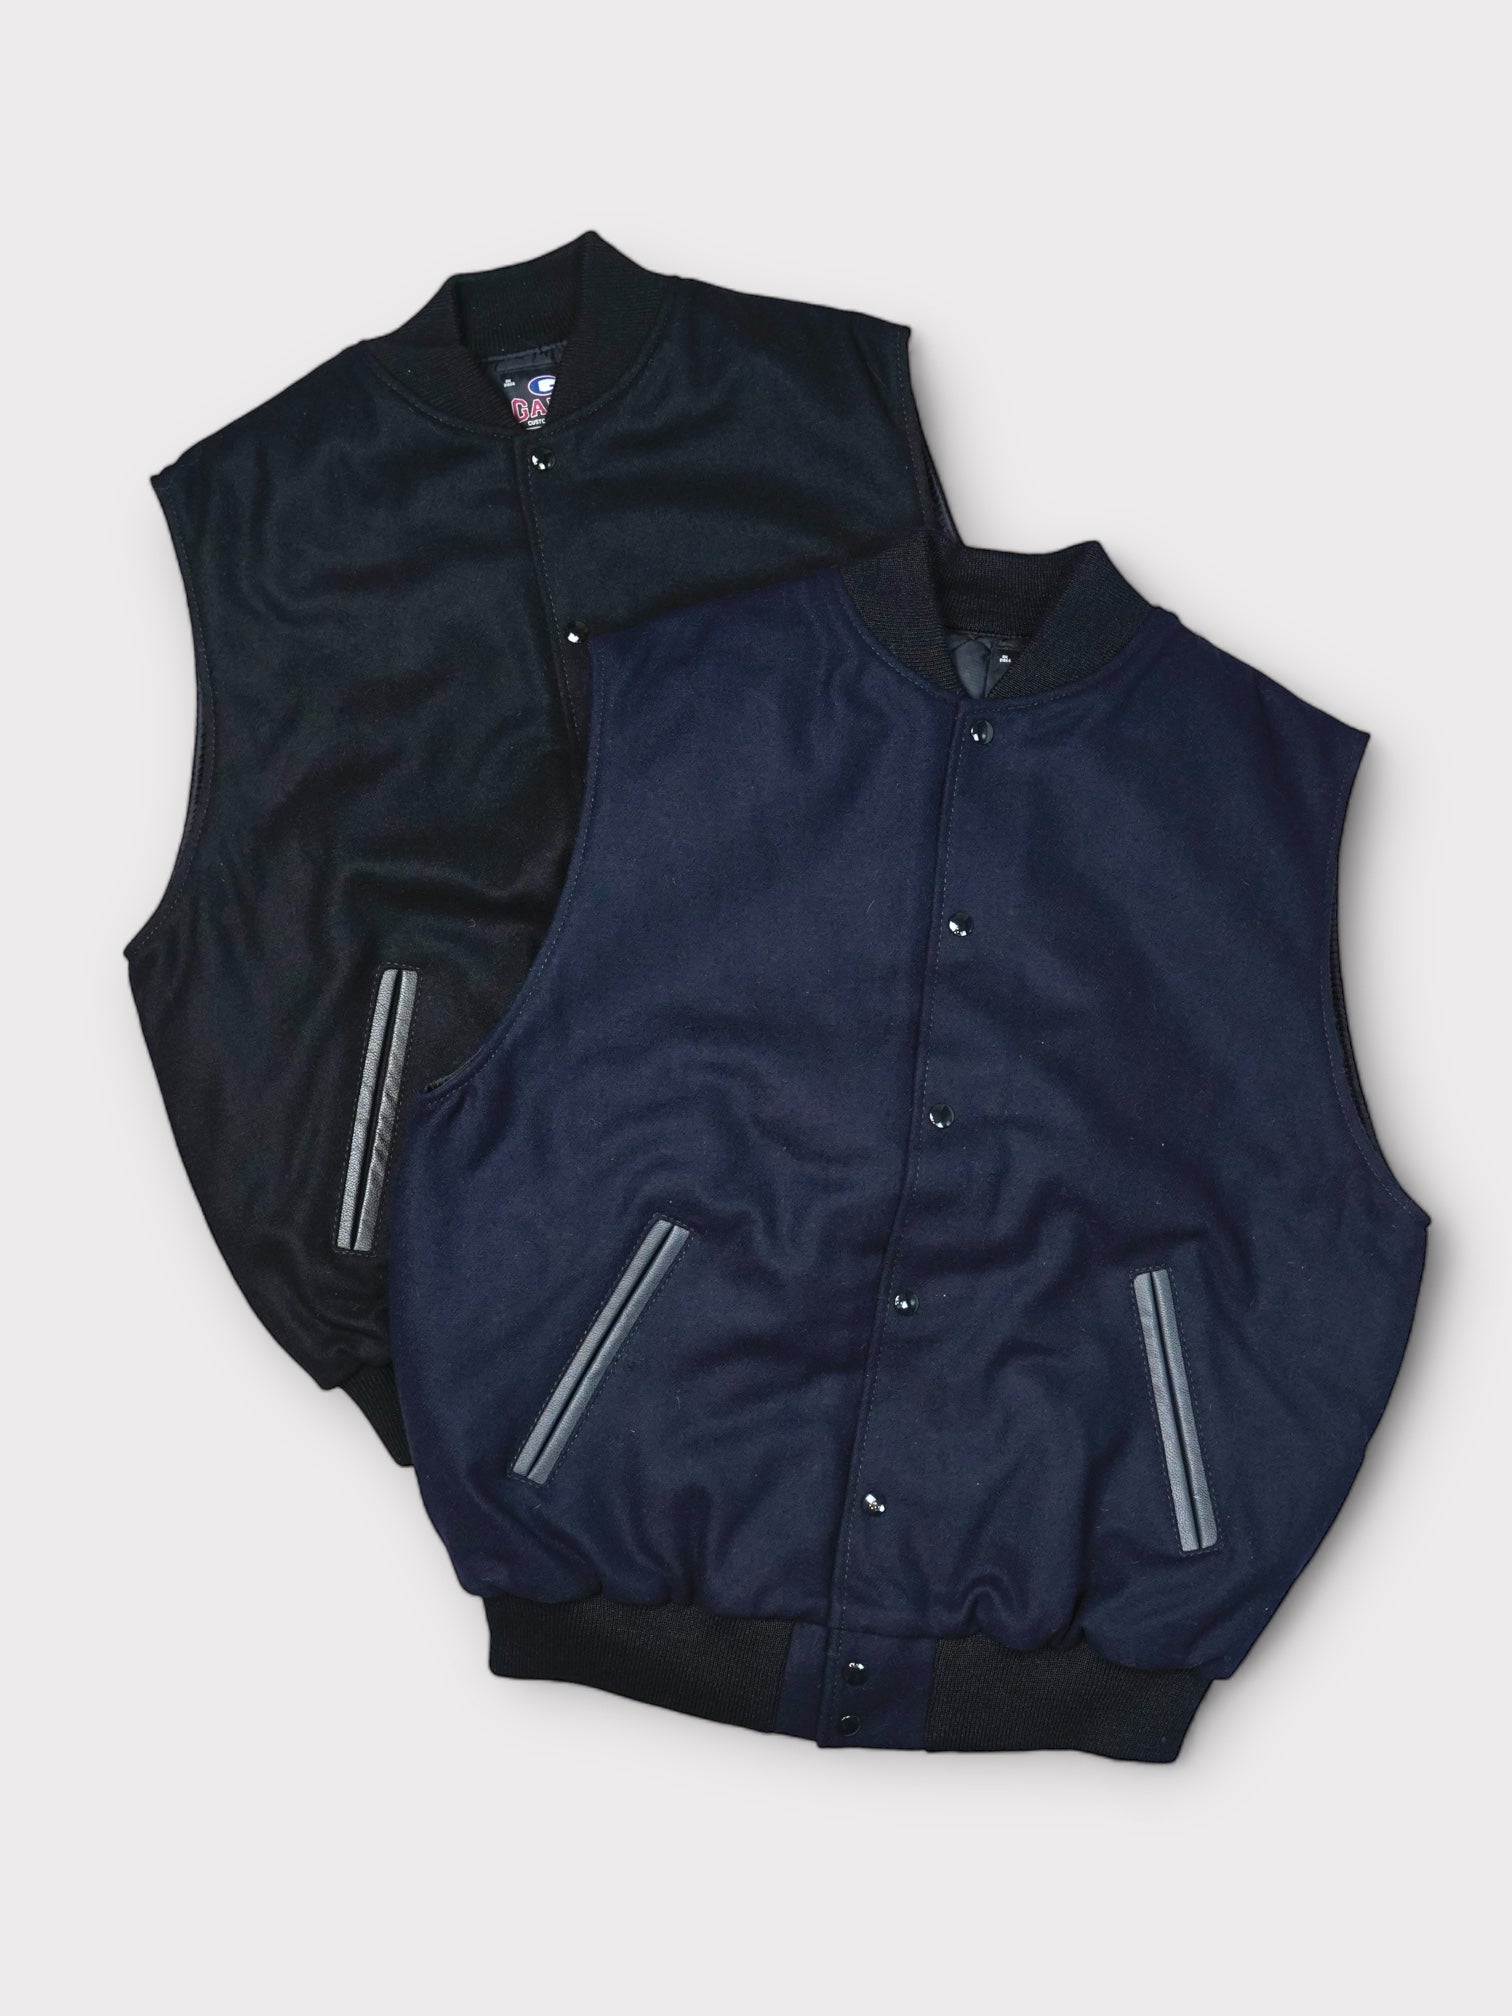 GAME SPORTSWEAR Varsity vest made in the USA 